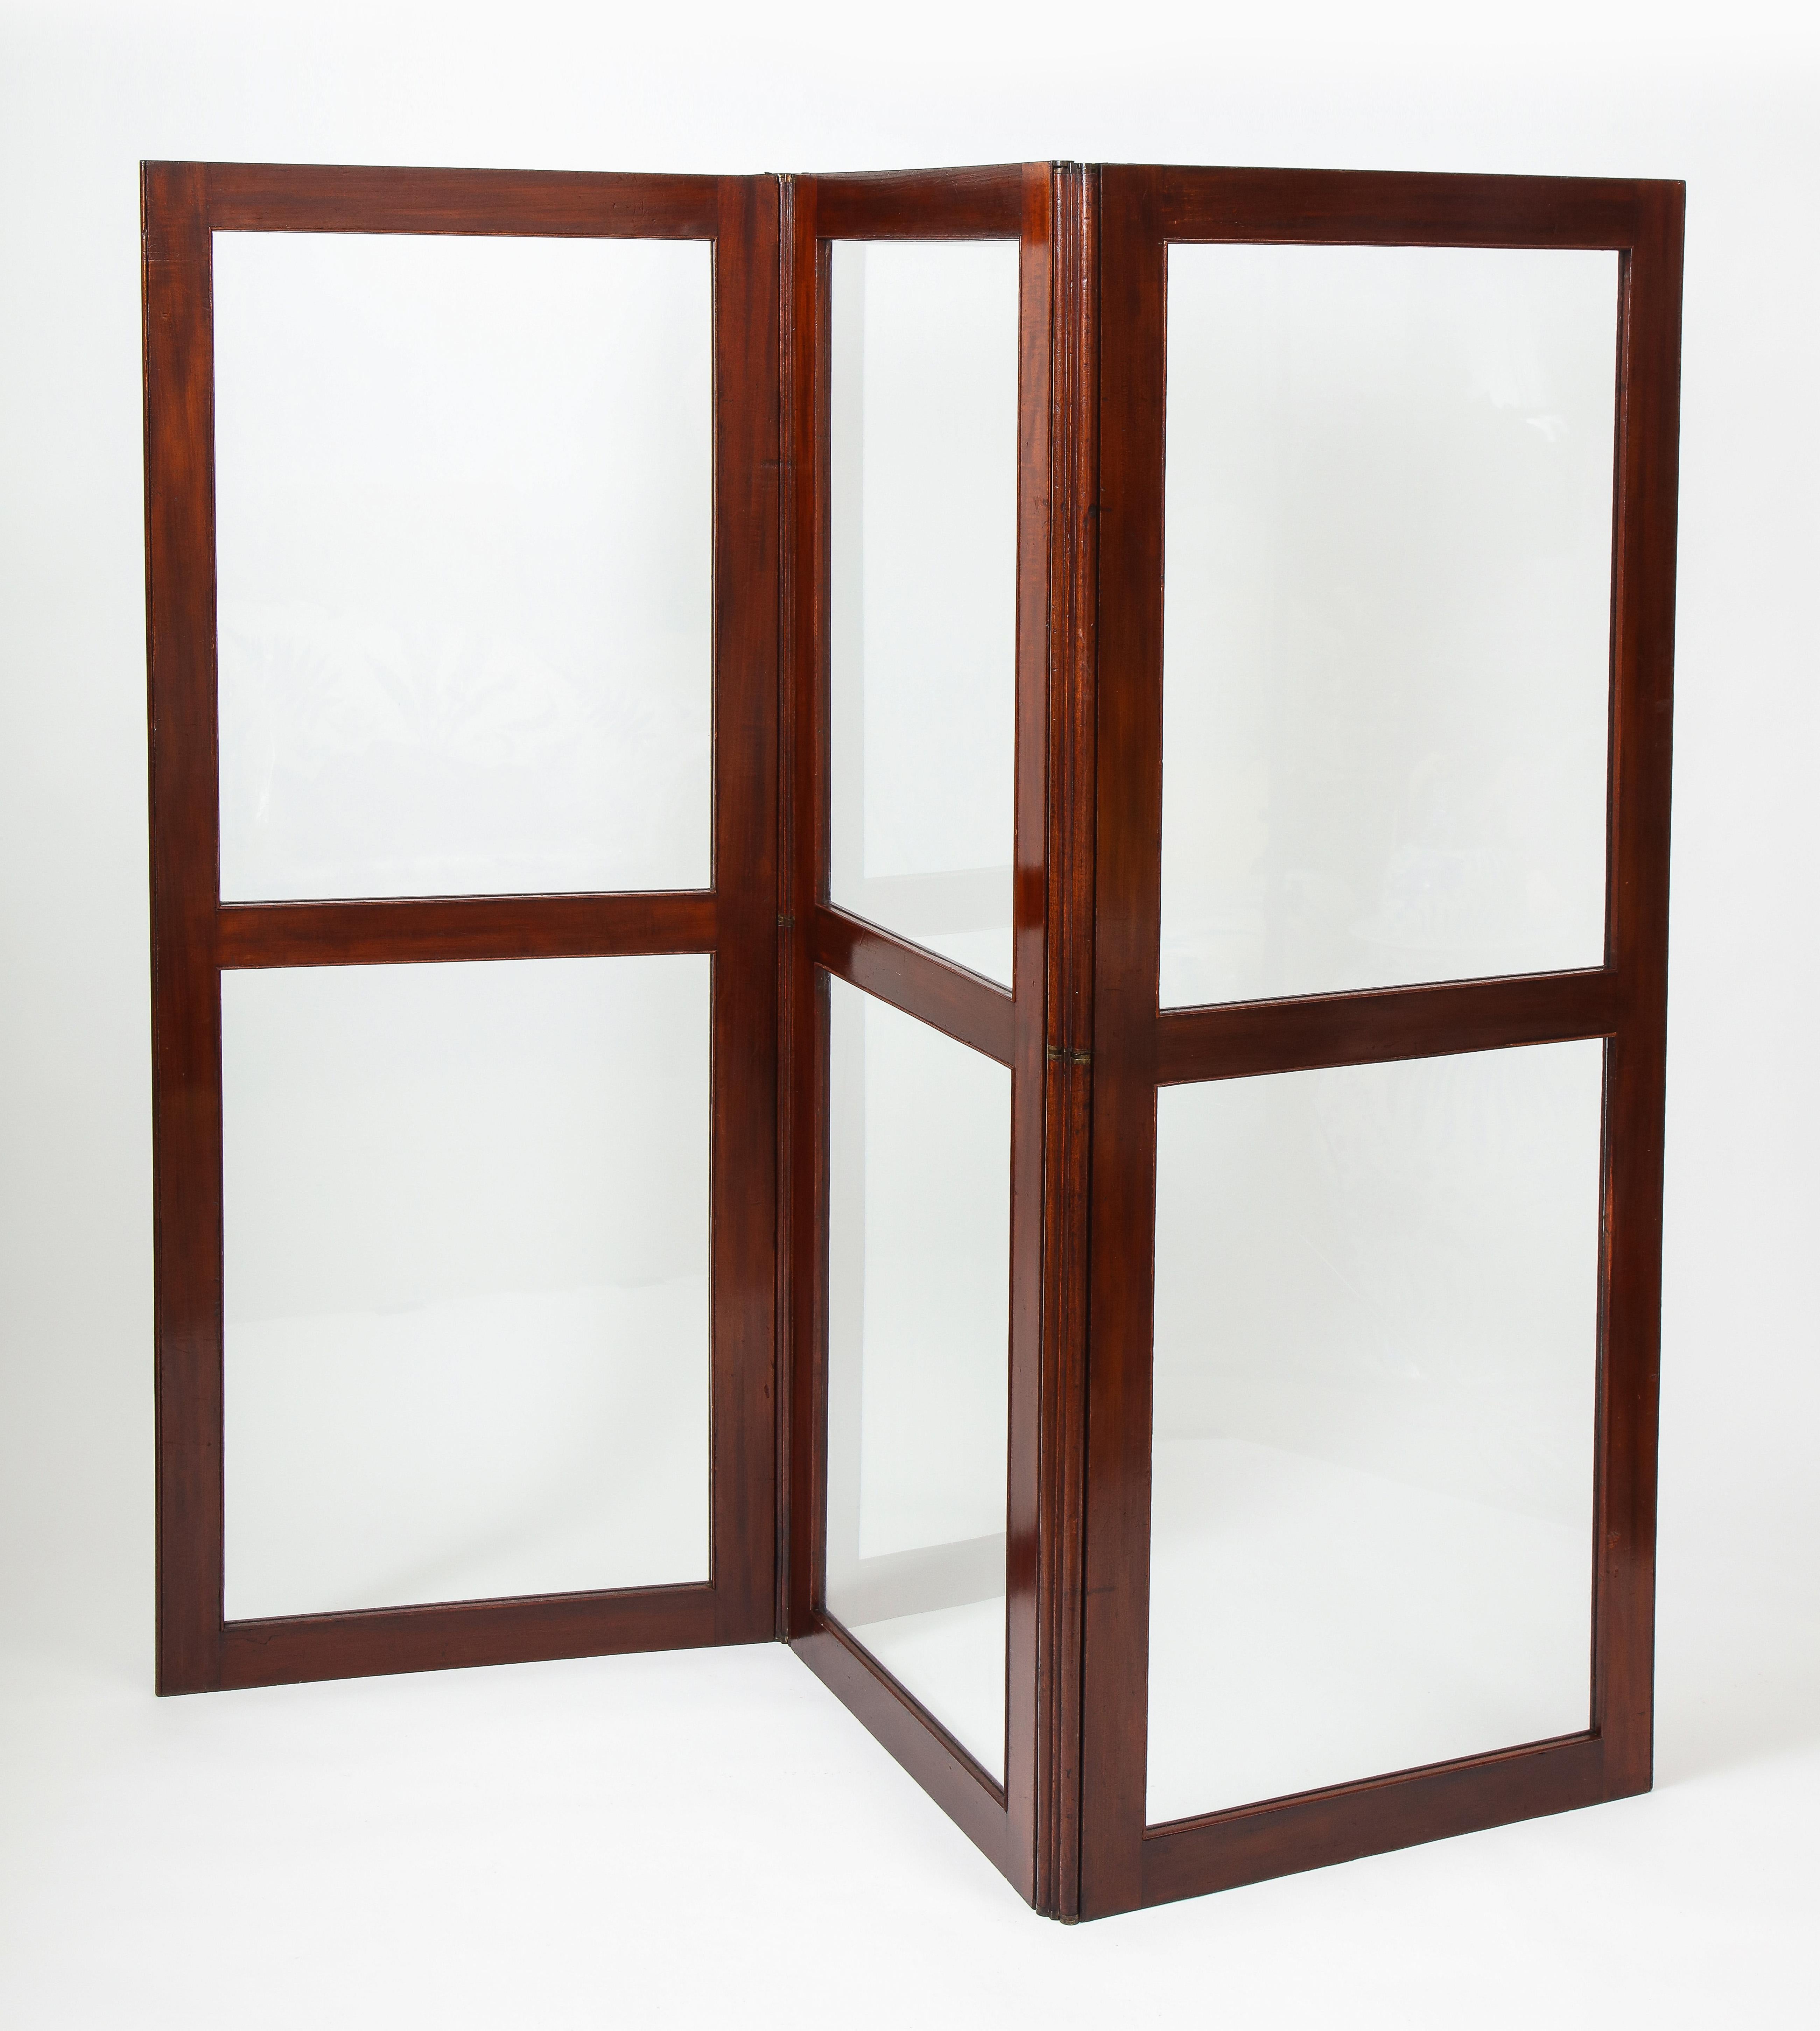 Each panel with richly hued mahogany frame enclosing clear glass, secured by brass hinges. Each panel measures: 27.25